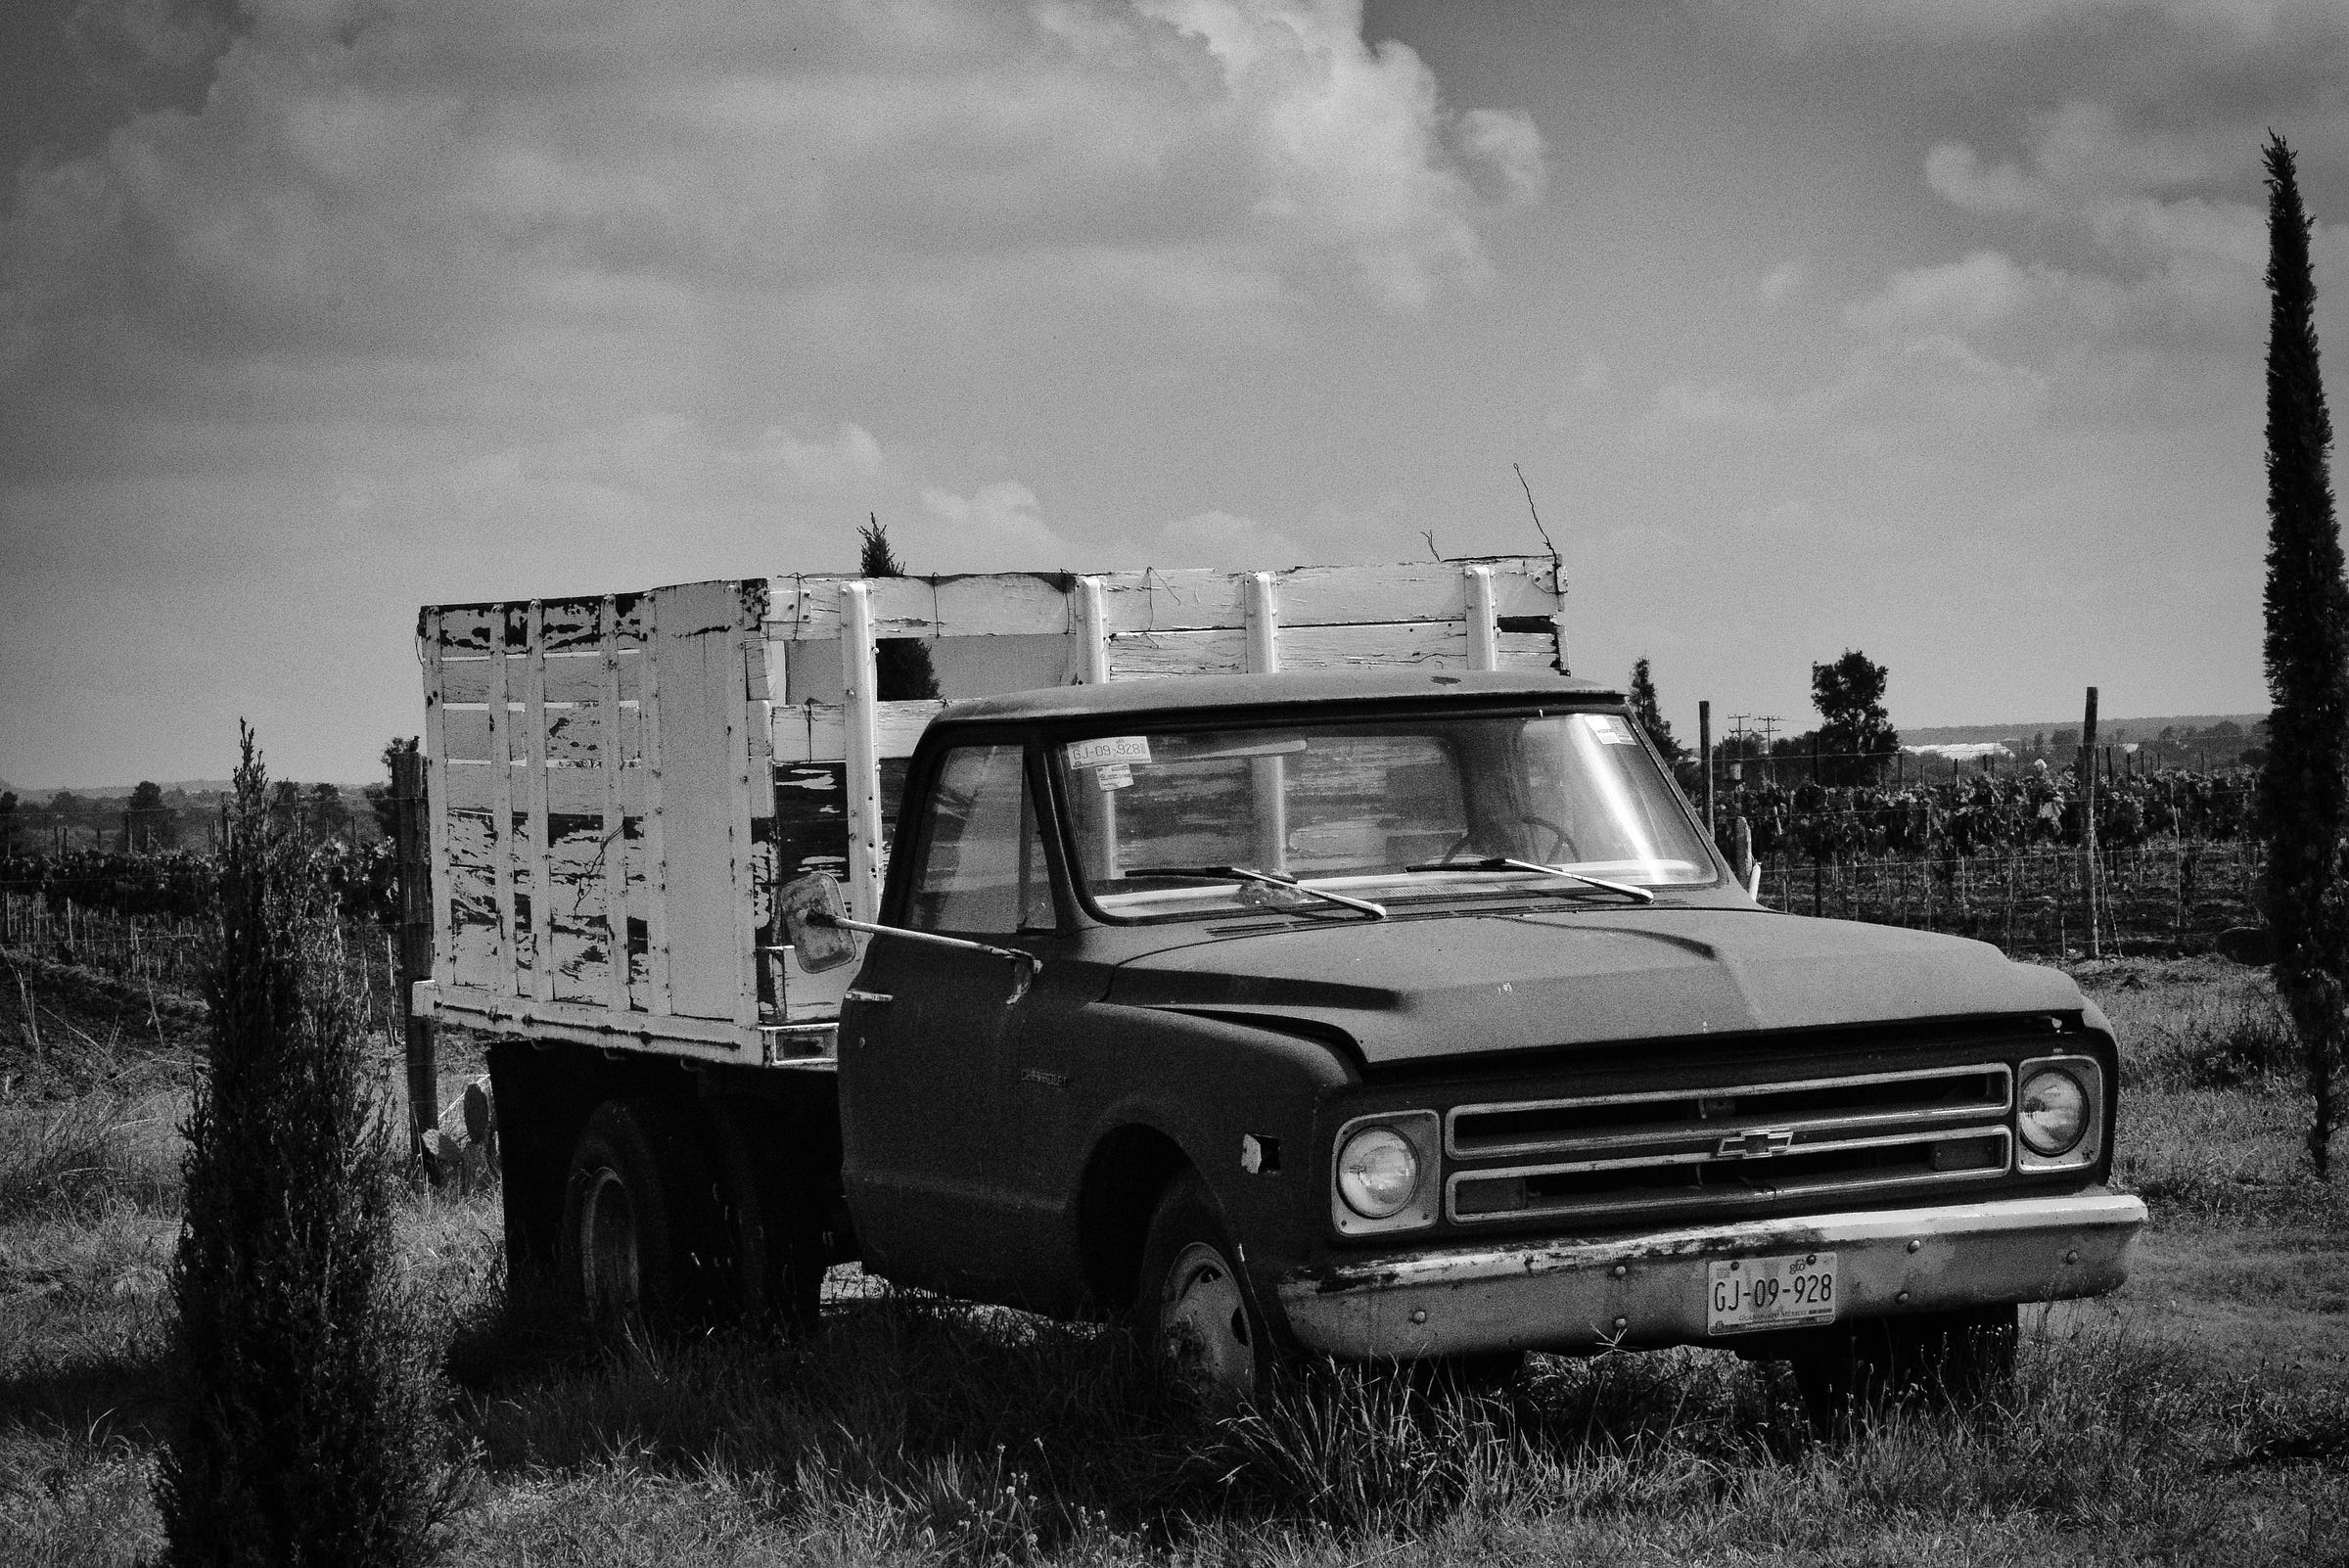 a black and white photo of an old farm truck with wooden sides and parked in a vineyard with rows of grapes behind it